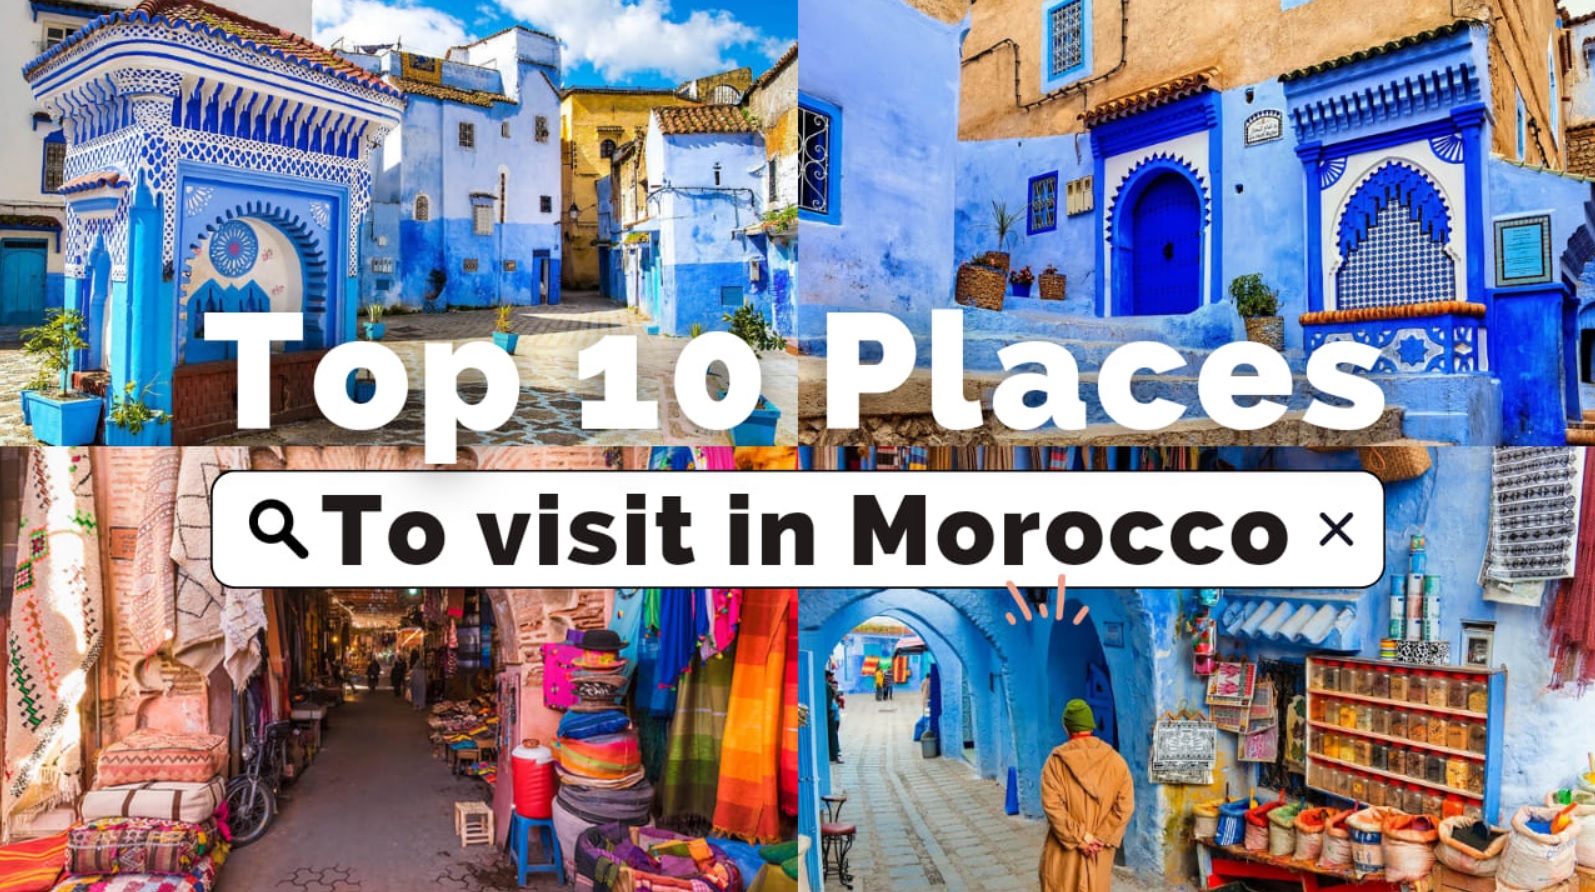 Top 10 best places to visit & things to do in Morocco Travel guide.